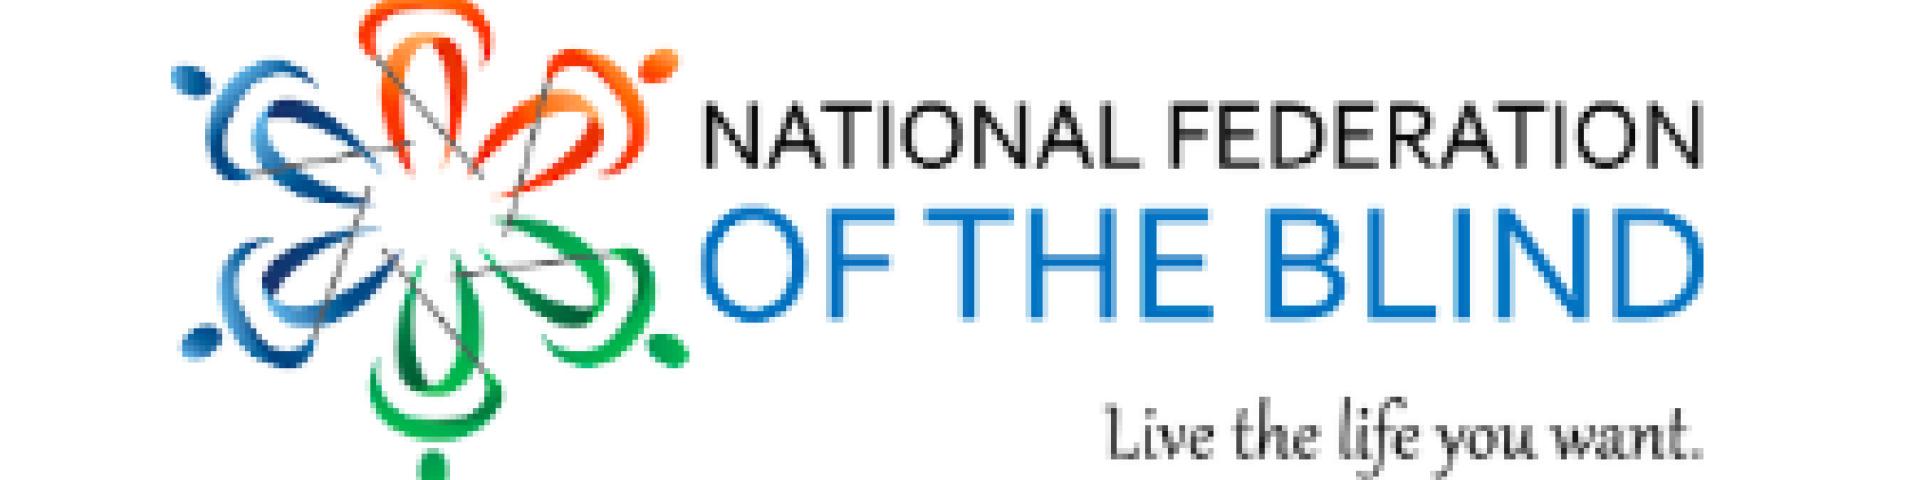 National Federation of the Blind Logo 